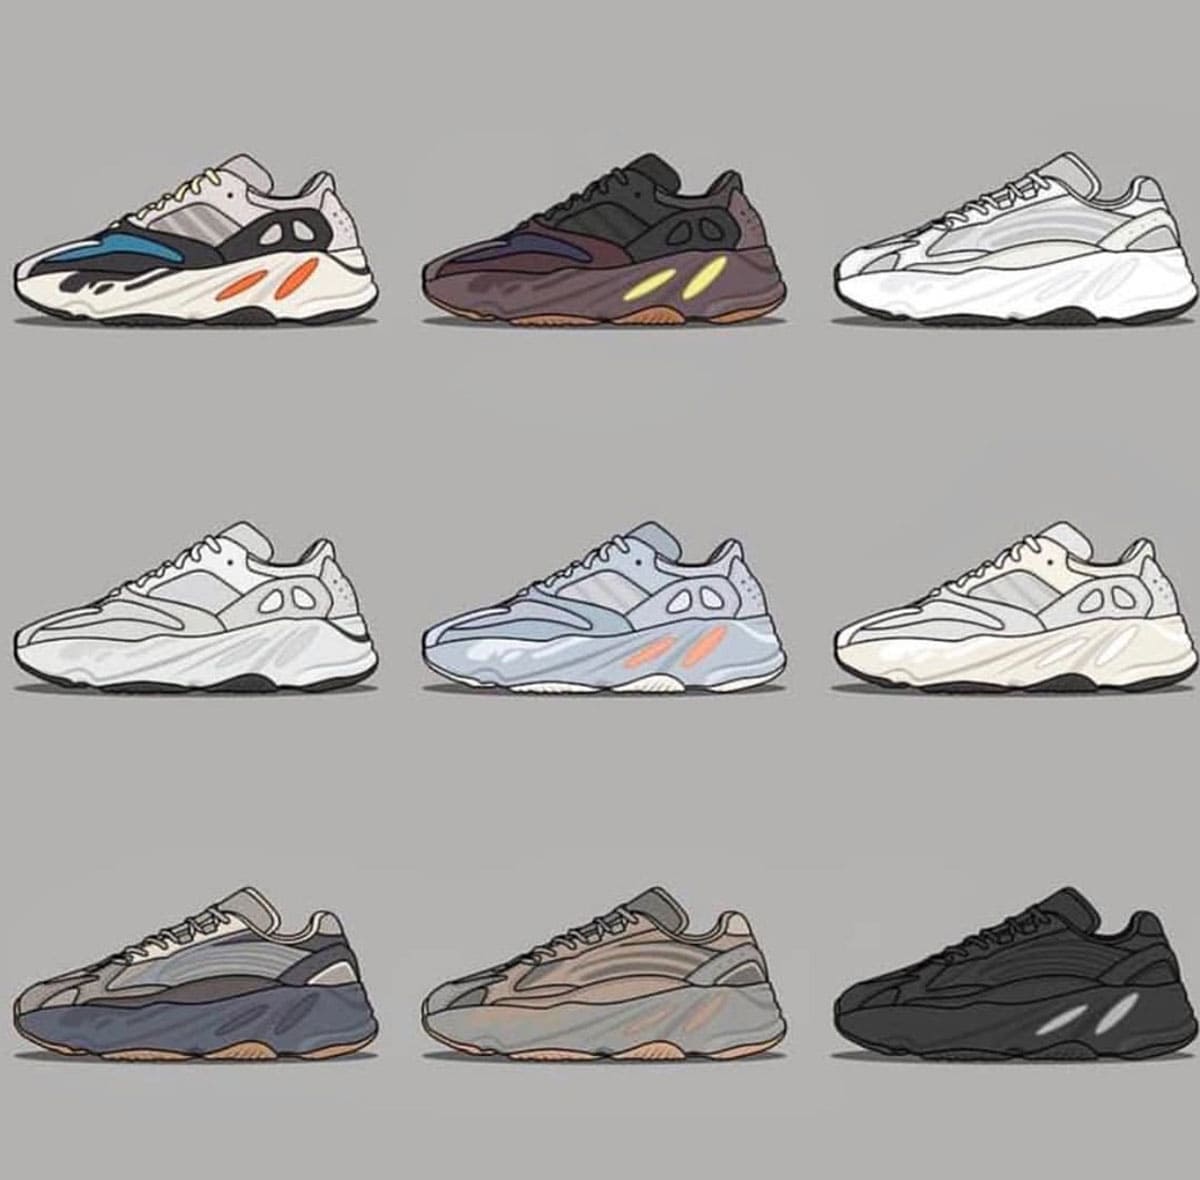 yeezy boost 700 all colors